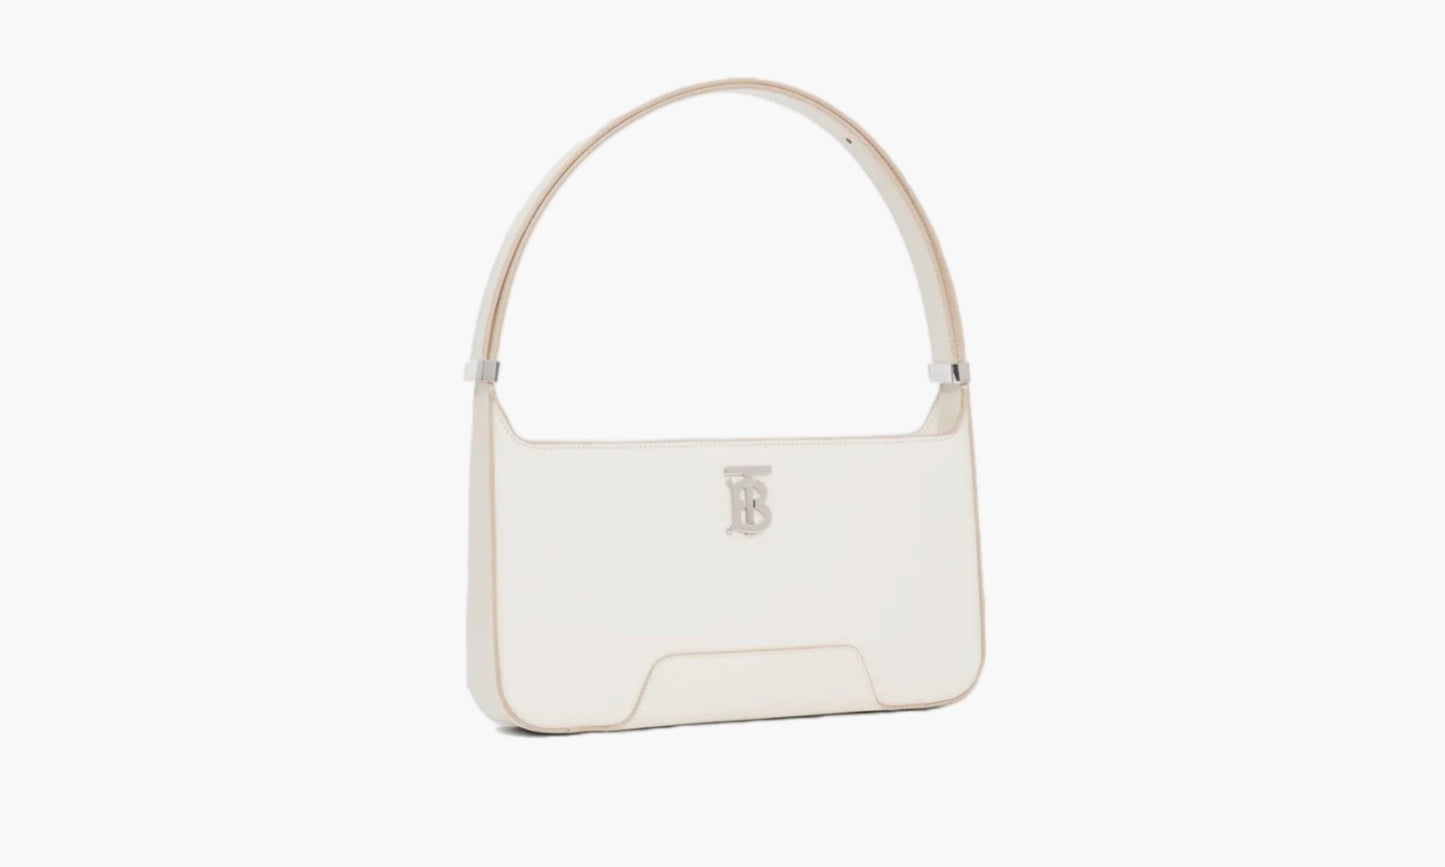 Burberry Leather TB Shoulder Bag Cream White | The Sortage